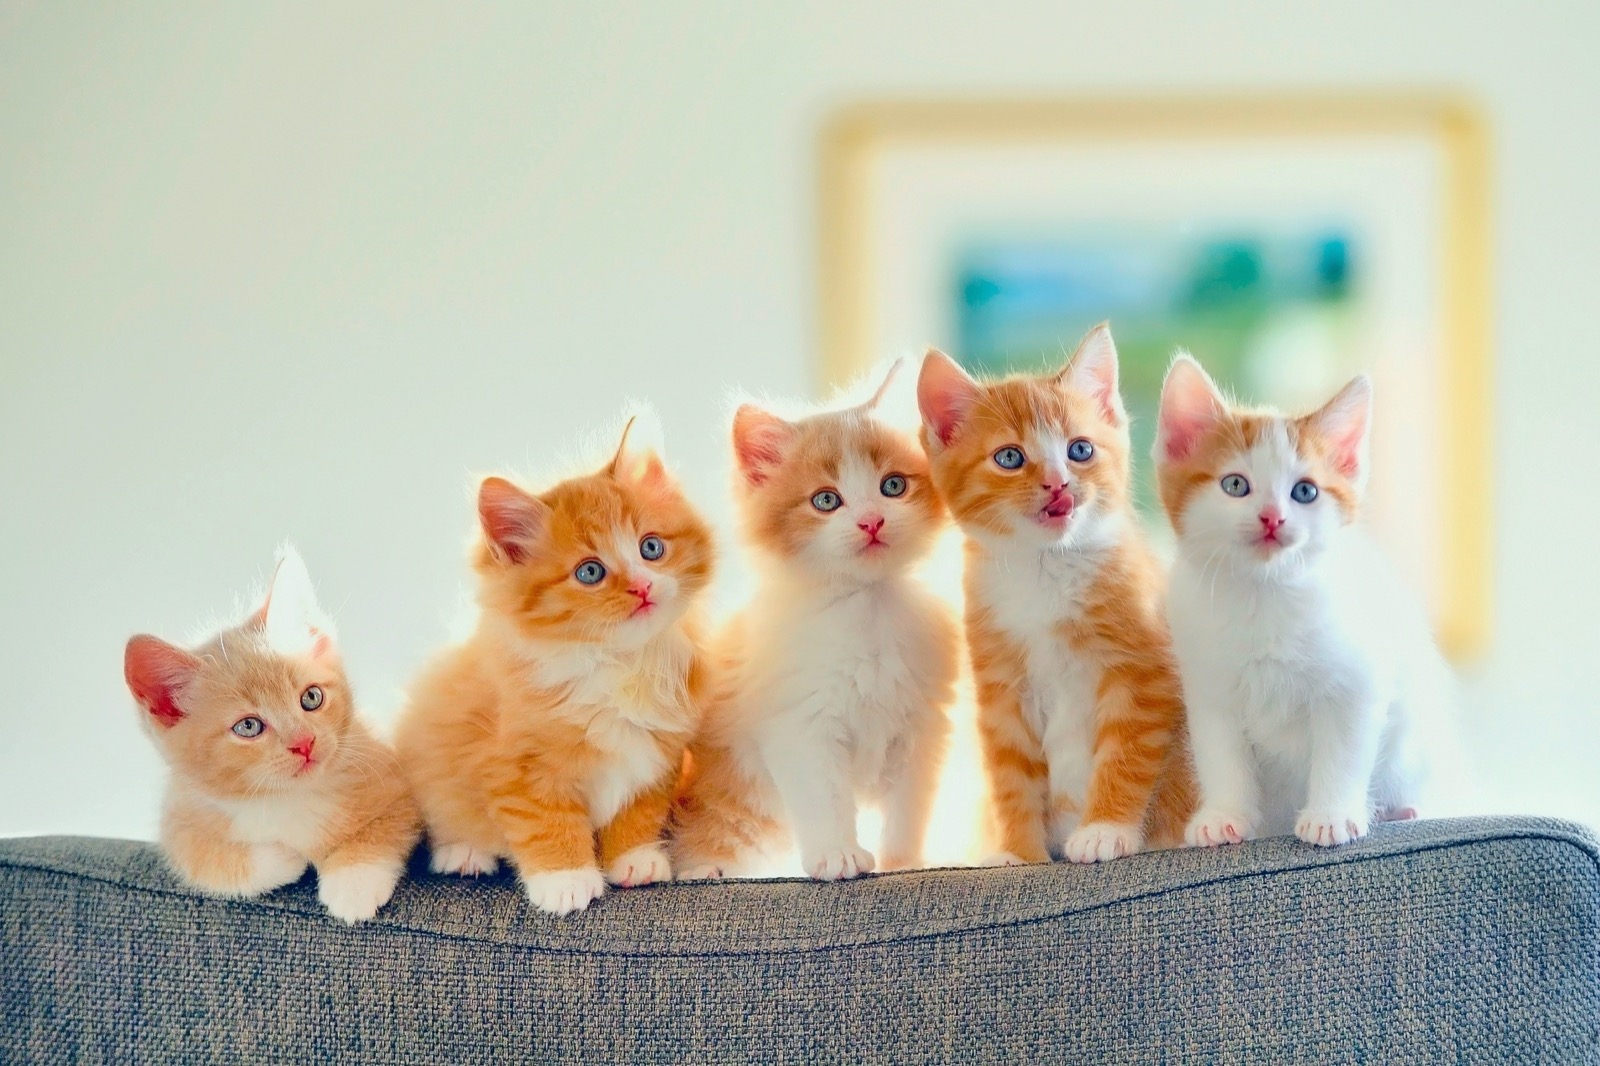 Can You Pass This General Knowledge Quiz While Being Distracted by Adorable Kittens? Cute cat kitten 8